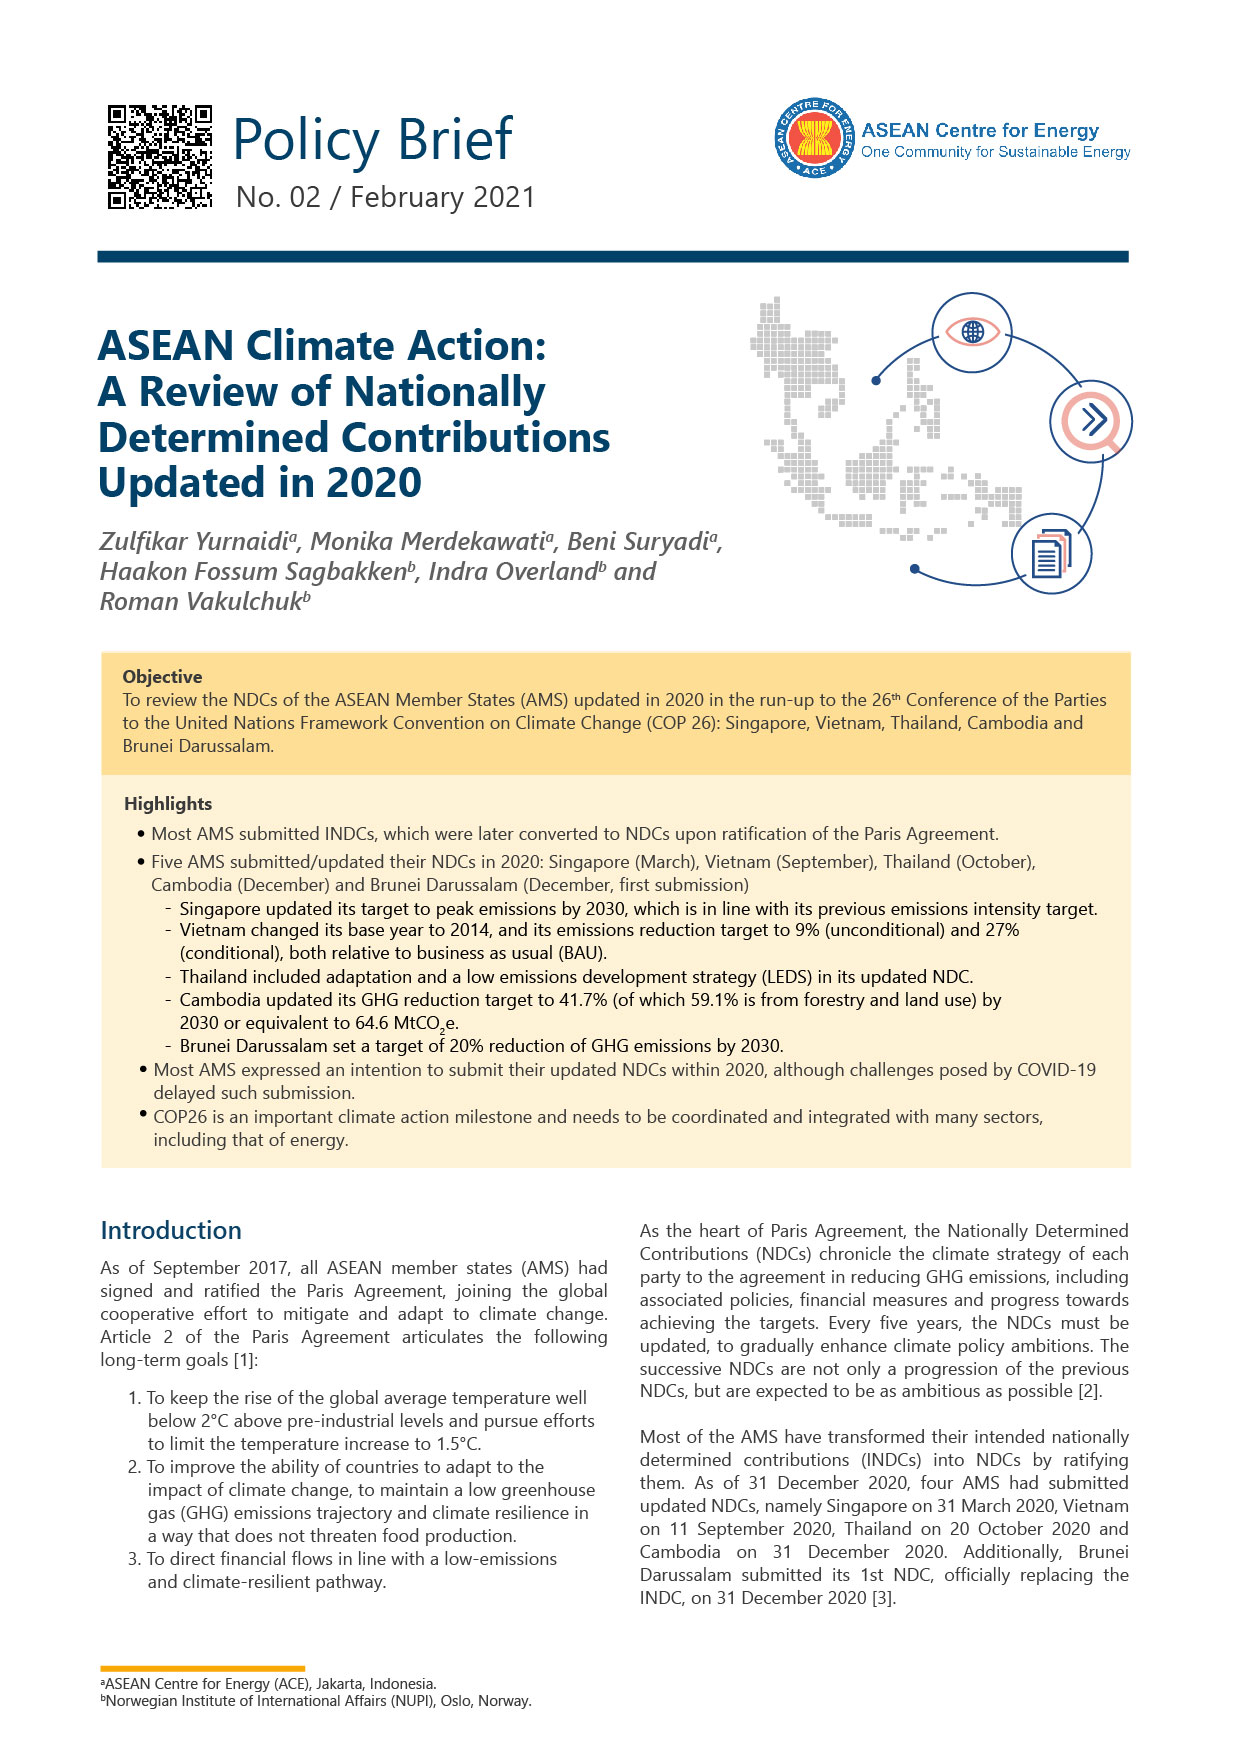 ASEAN Climate Action: A Review of Nationally Determined Contributions Update in 2020